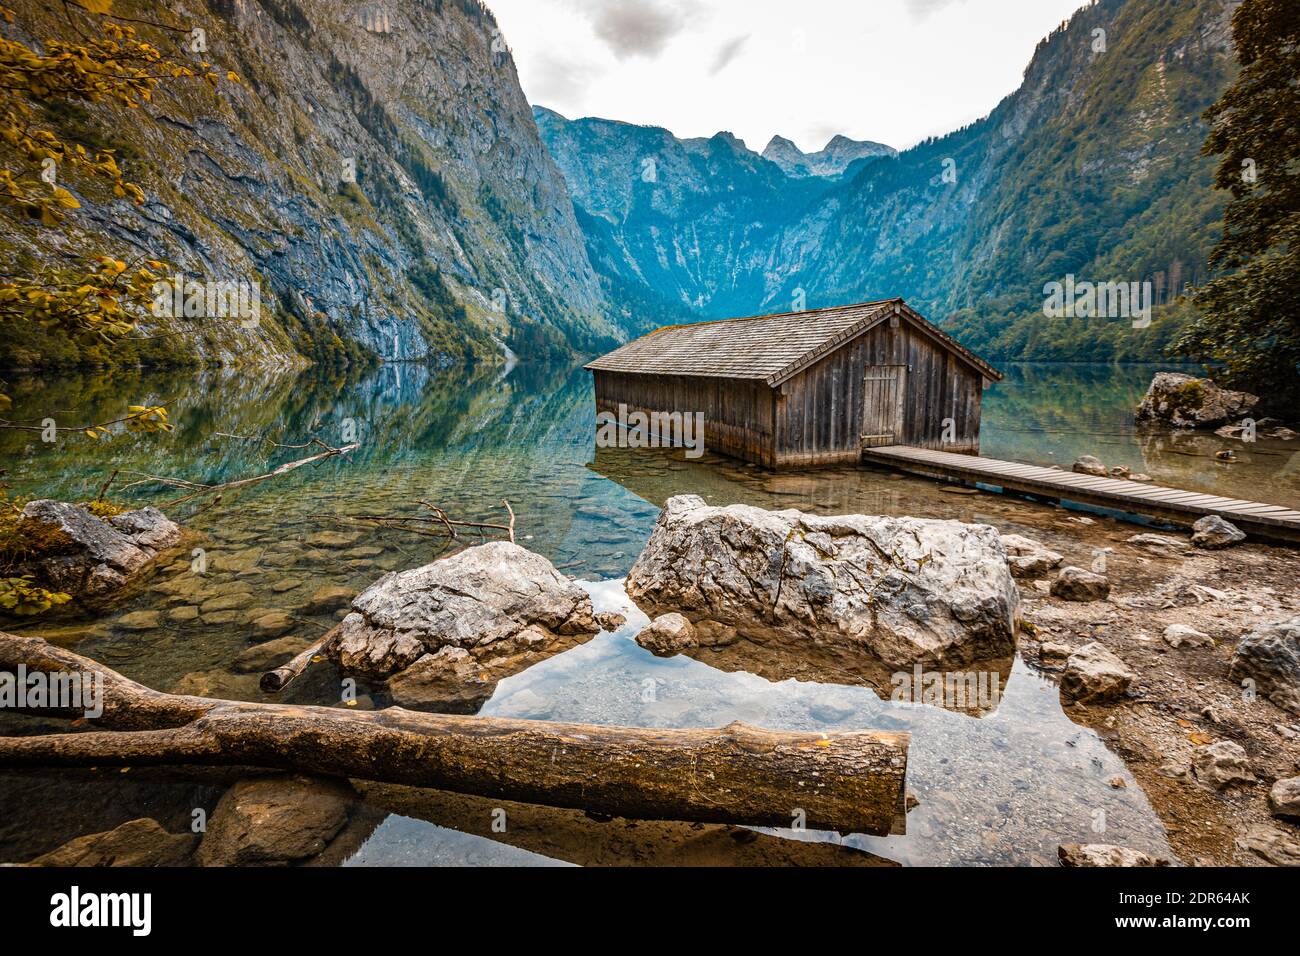 Boathouse in Obersee German Alps Stock Photo